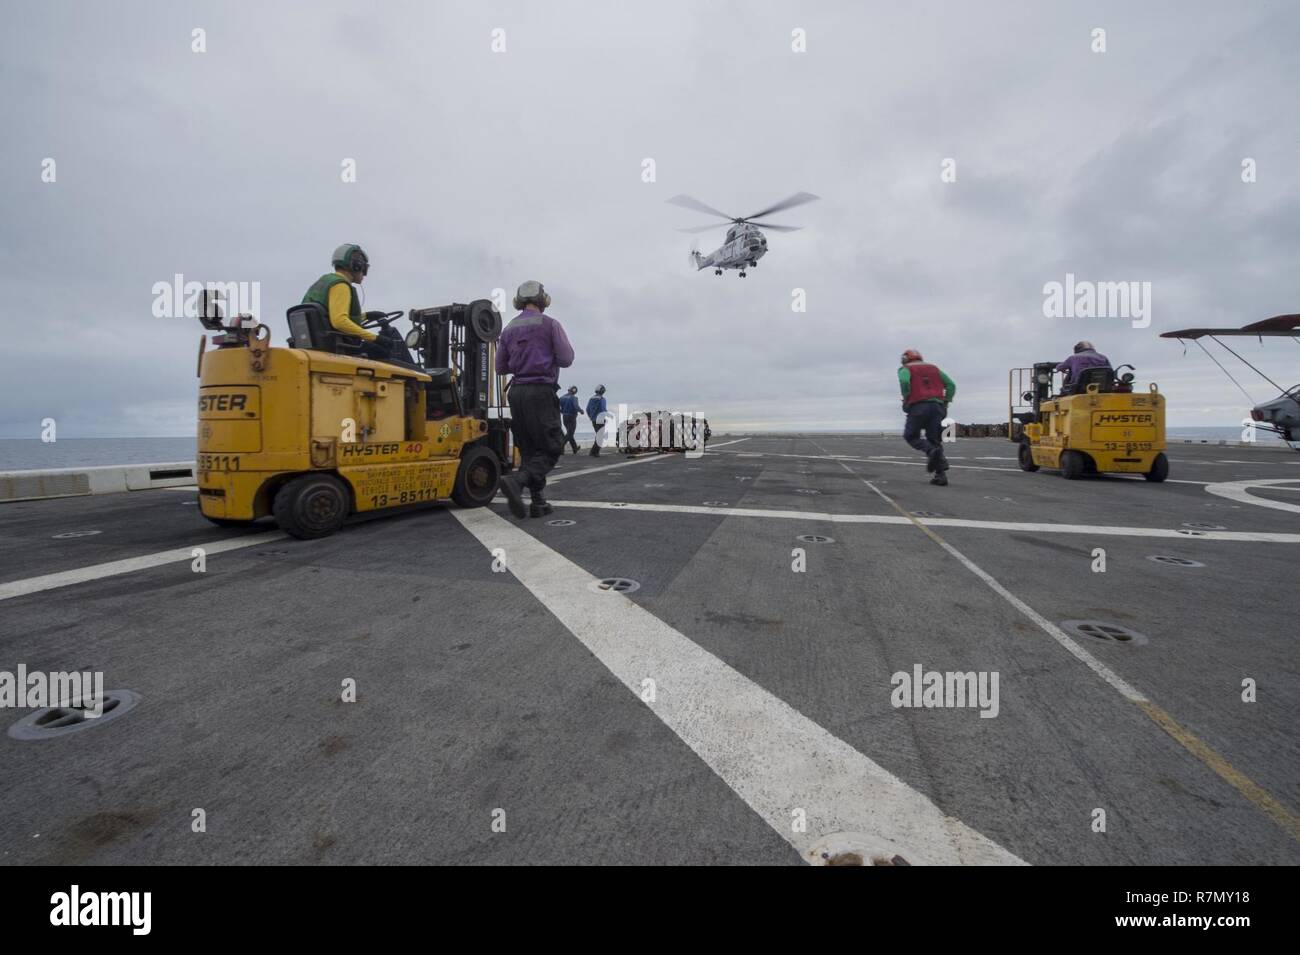 EAST CHINA SEA (March 20, 2017) An SA-330J Puma helicopter, assigned to the Military Sealift Command dry cargo and ammunition ship USNS Richard E. Byrd (T-AKE 4), departs the flight deck of the amphibious transport dock ship USS Green Bay (LPD 20) during a vertical replenishment. Green Bay, part of the Bonhomme Richard Expeditionary Strike Group, with embarked 31st Marine Expeditionary Unit, is on a routine patrol, operating in the Indo-Asia-Pacific region to enhance warfighting readiness and posture forward as a ready-response force for any type of contingency. Stock Photo